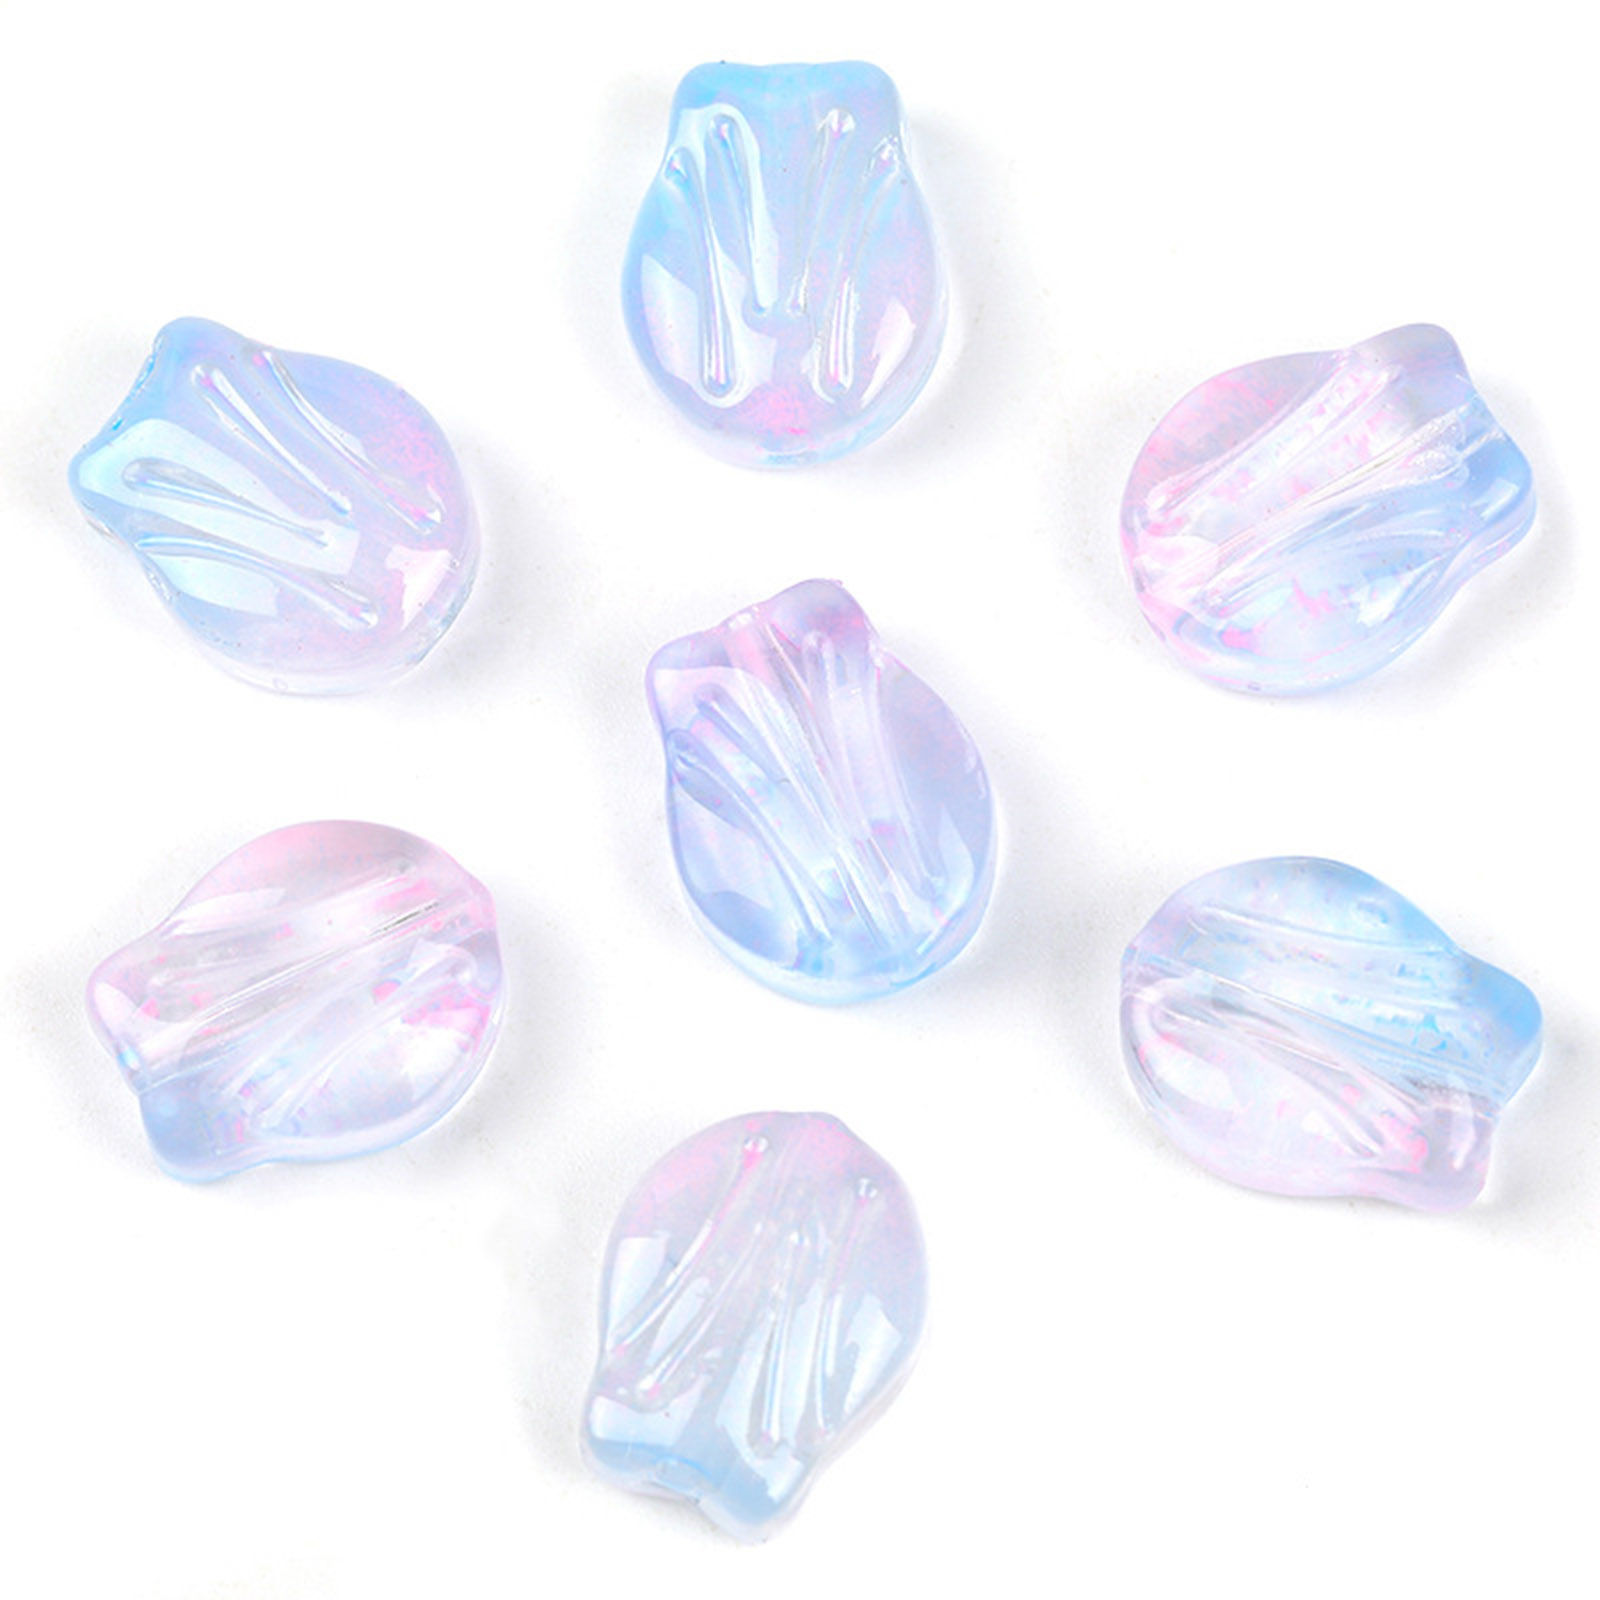 Picture of Lampwork Glass Beads Tulip Flower Light Blue & Light Pink Gradient Color About 10.5mm x 8.4mm, Hole: Approx 0.8mm, 20 PCs